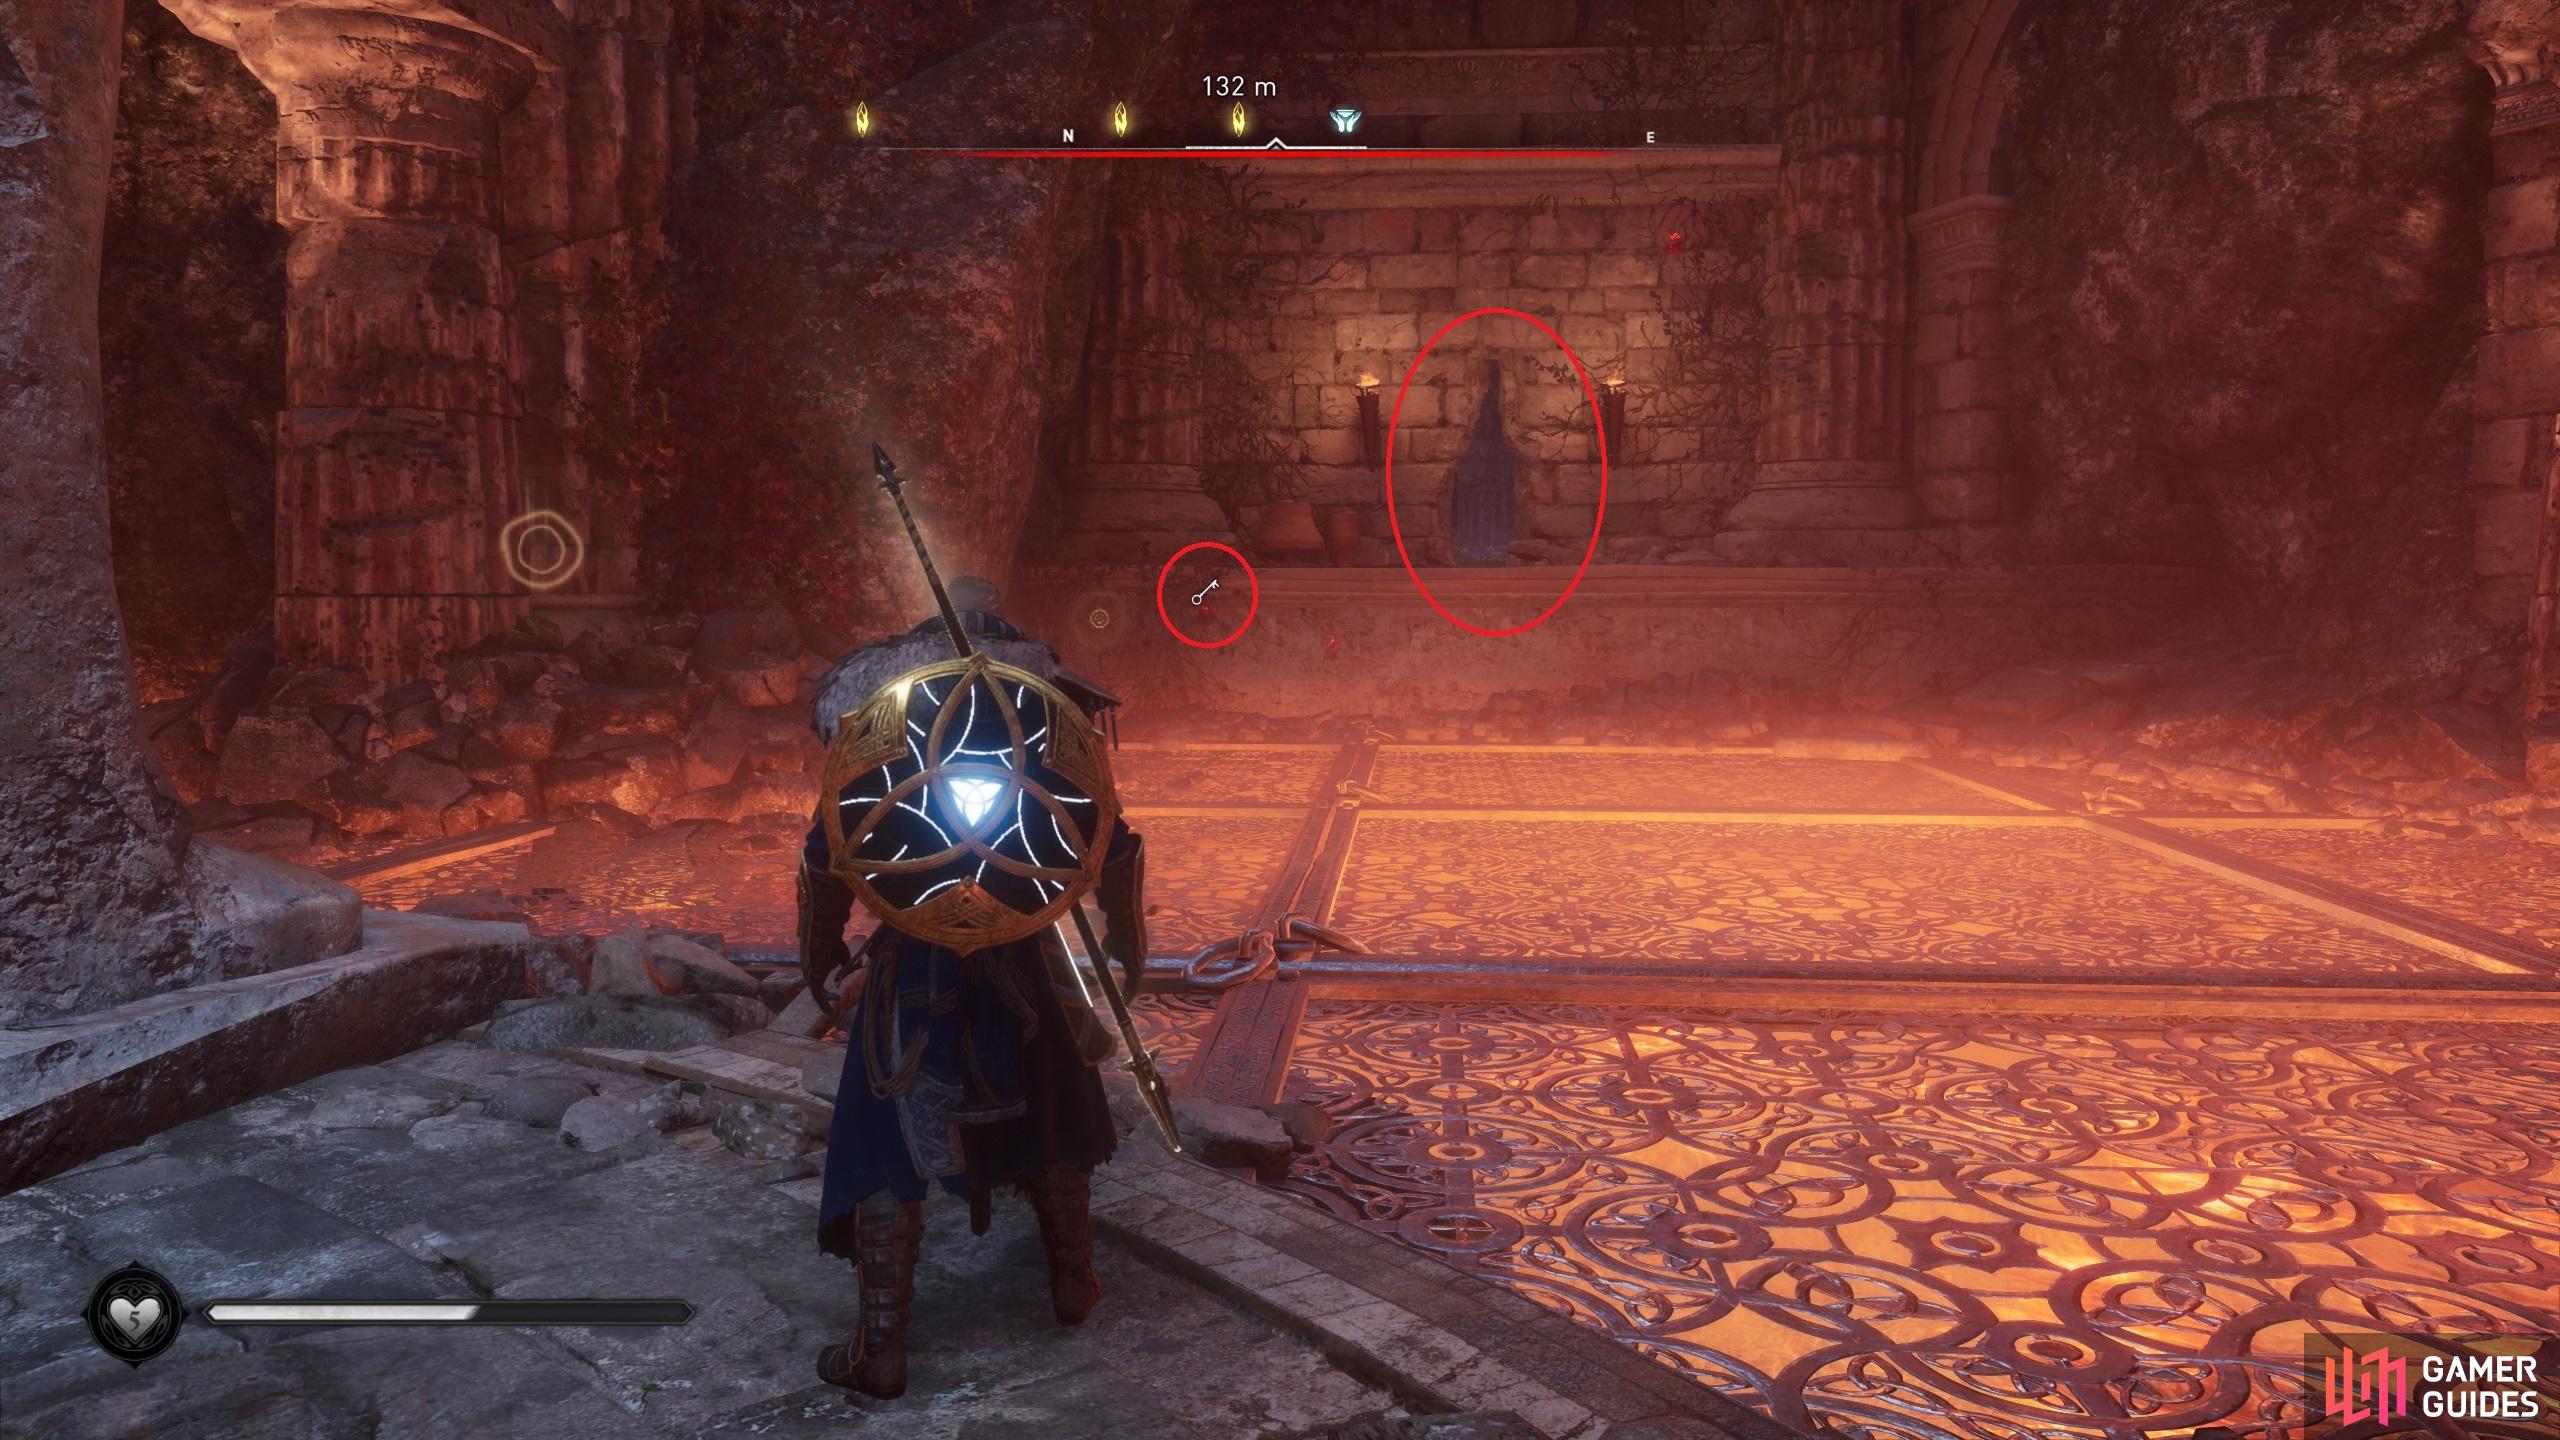 Use Odin's Sight to highlight the precise location of the key, and go through the crack to find it.